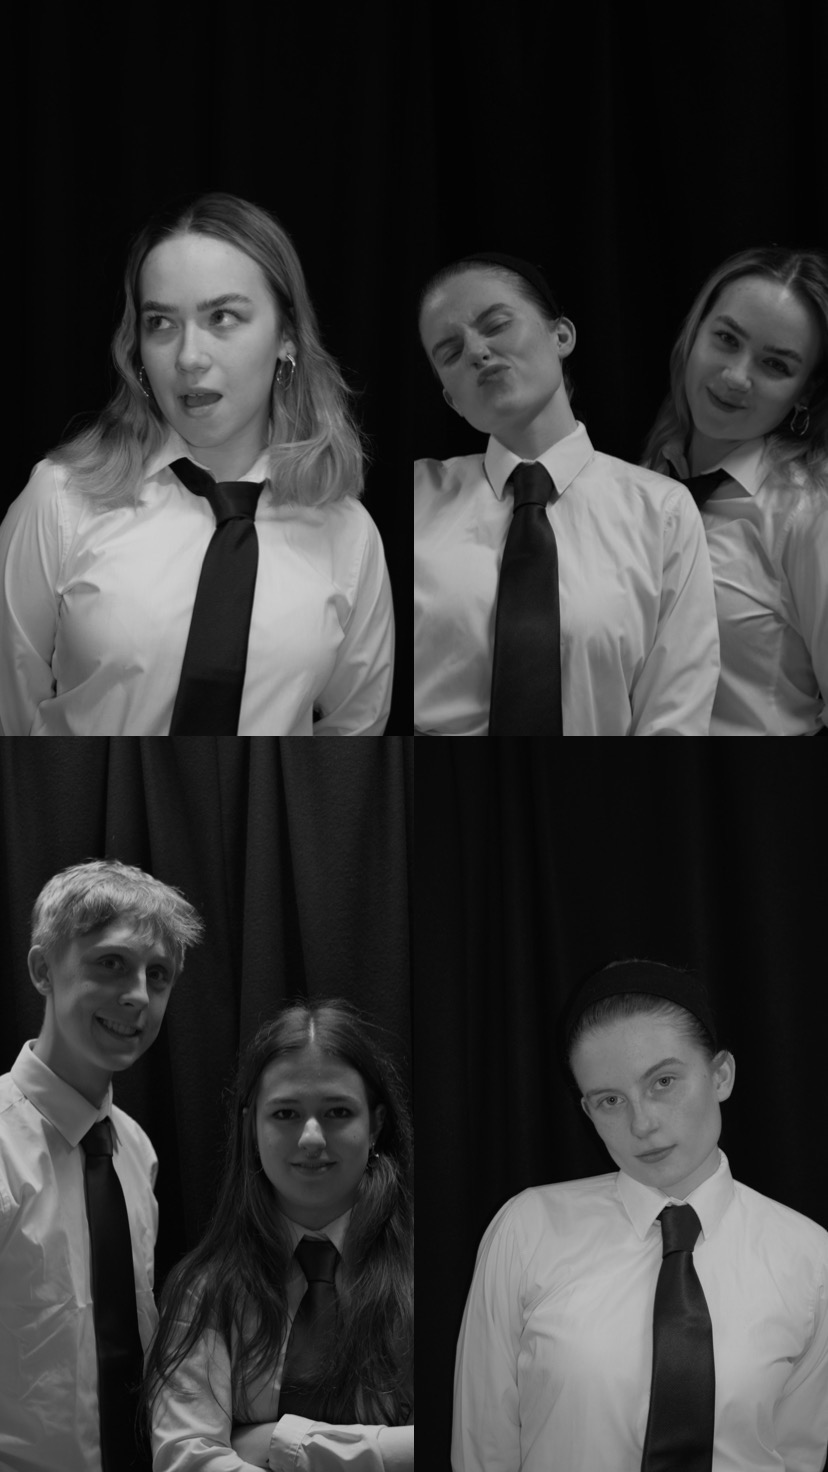 Four images in a black and white grid, each of school students in shirts and ties